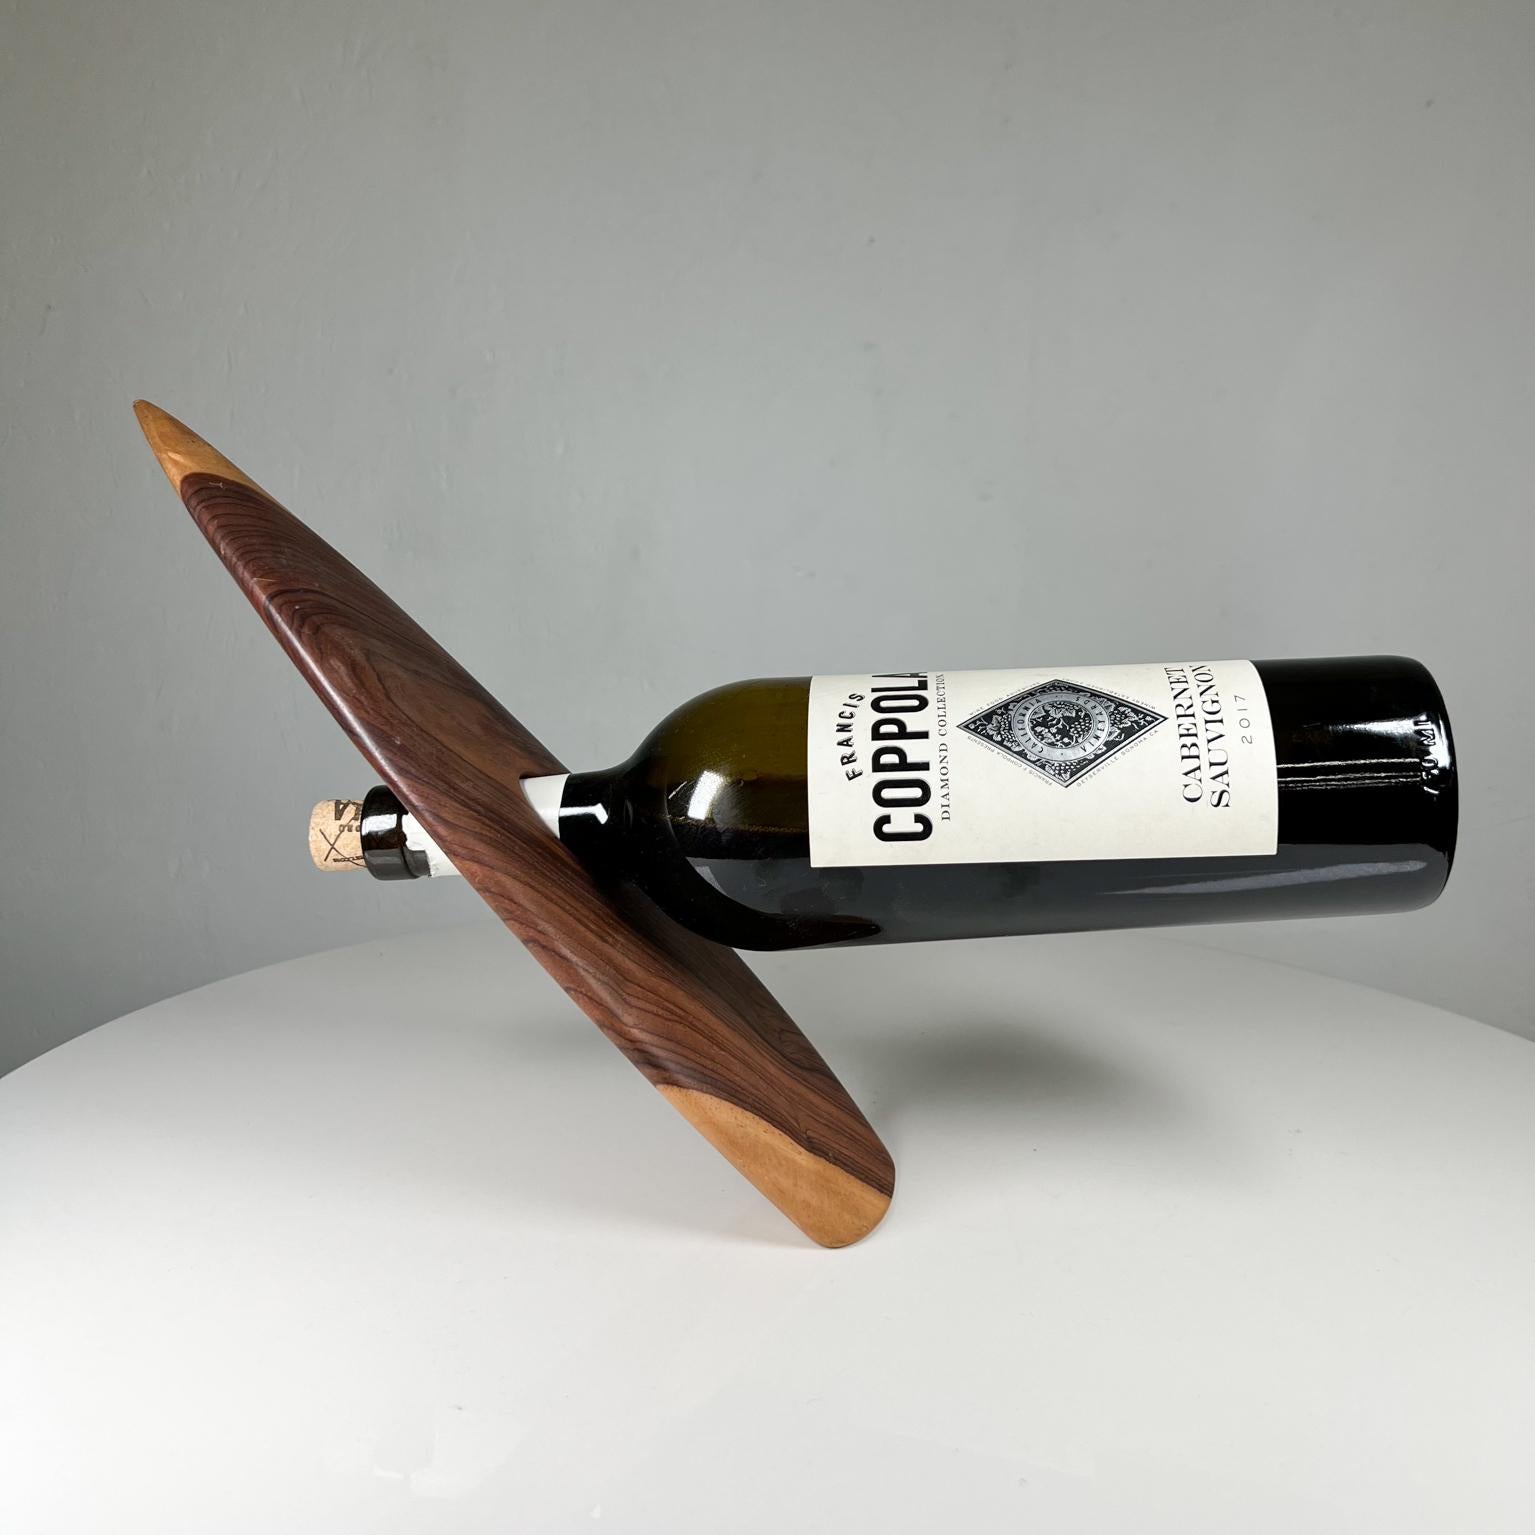 1970s Modern Design Wood Wine Holder Stand Don Shoemaker Style
Wine Holder in two-tone Wood
12.75 x 4.38 x .75
Preowned vintage condition
See images provided.